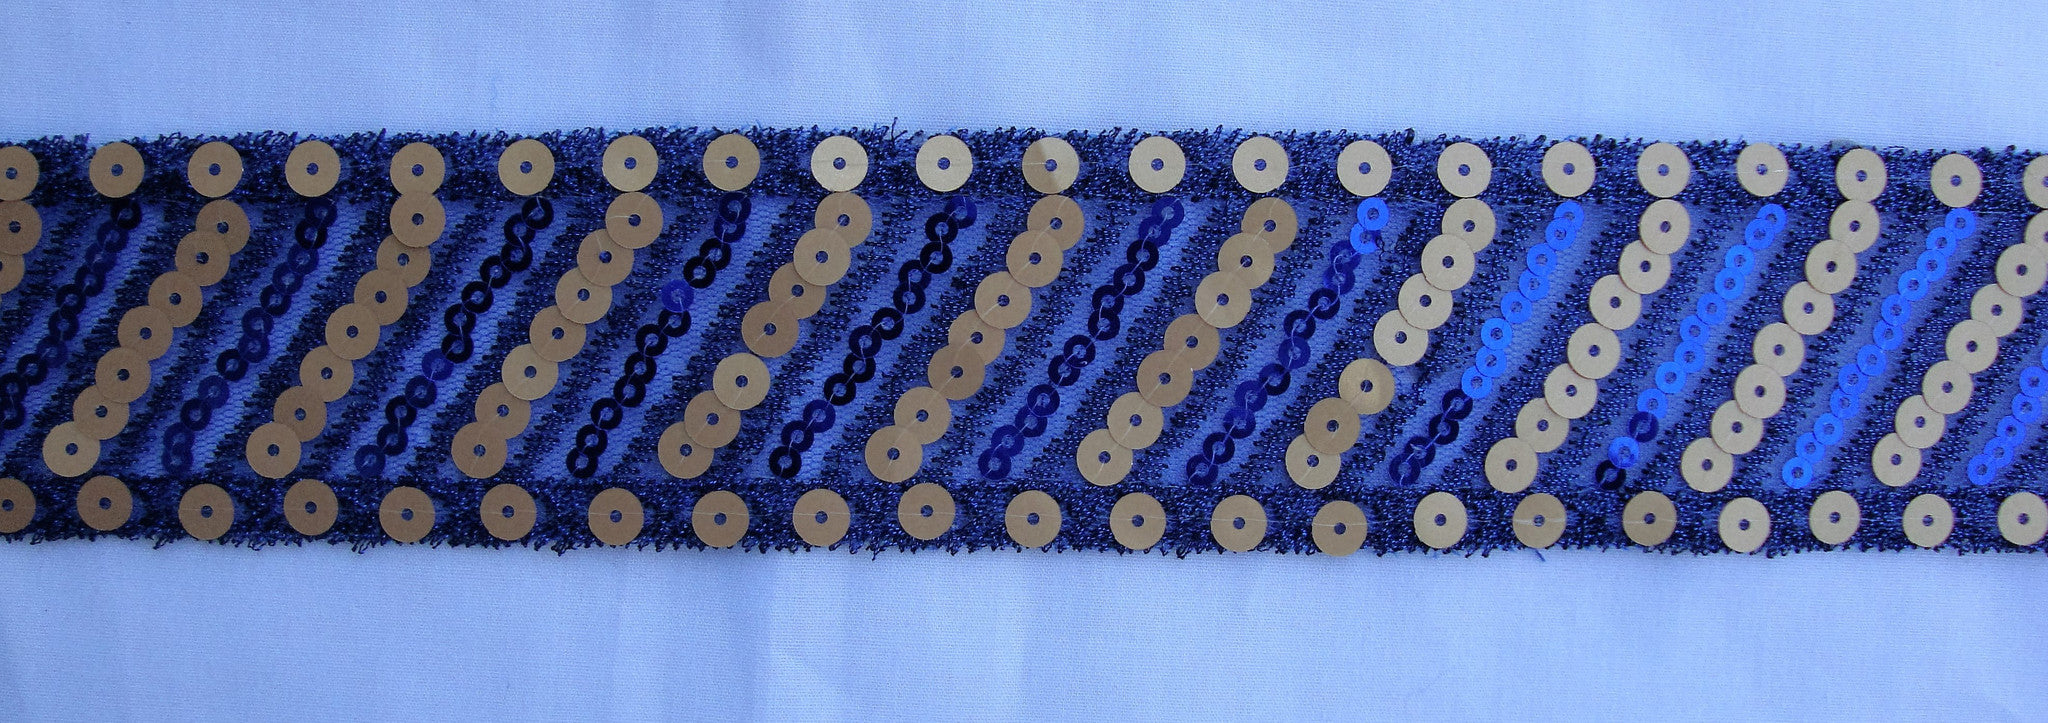 Royal Blue Trimming with Sequins (Sold as a 3 yard piece)